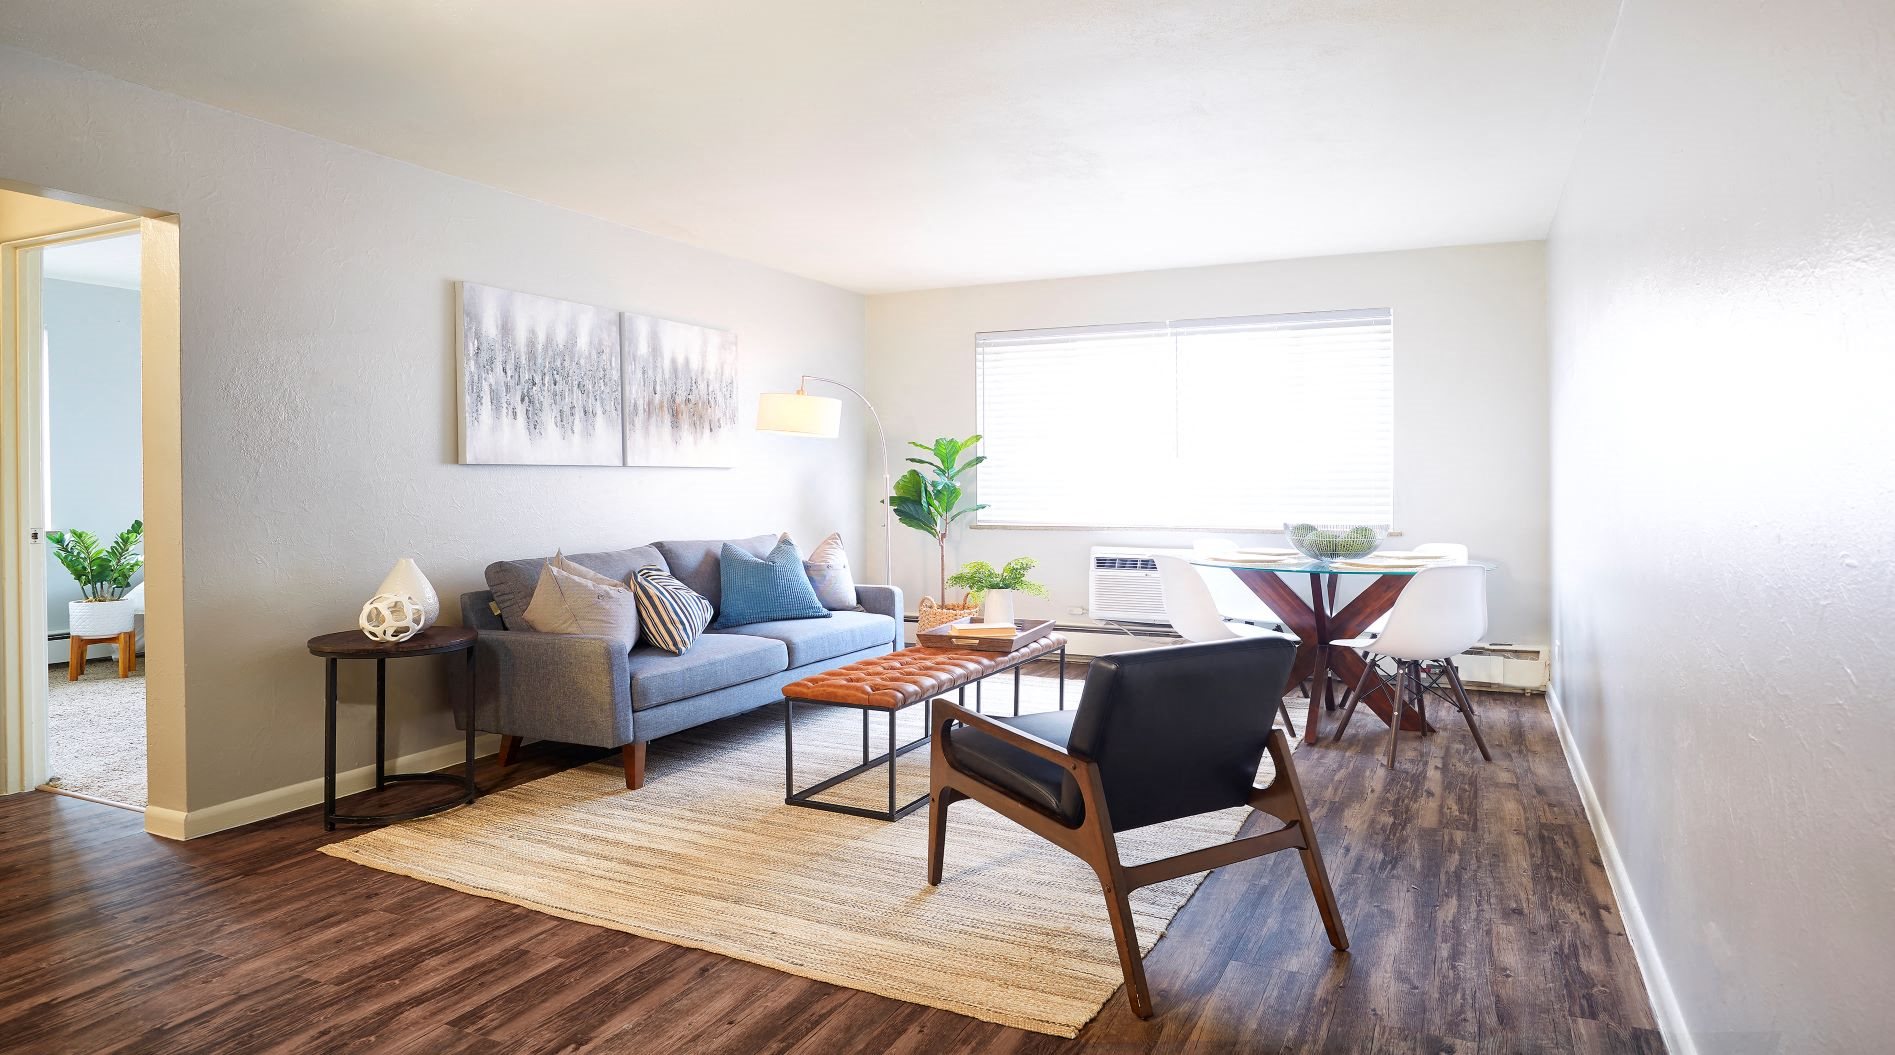 Photos and Video of Windermere Apartments in Littleton, CO